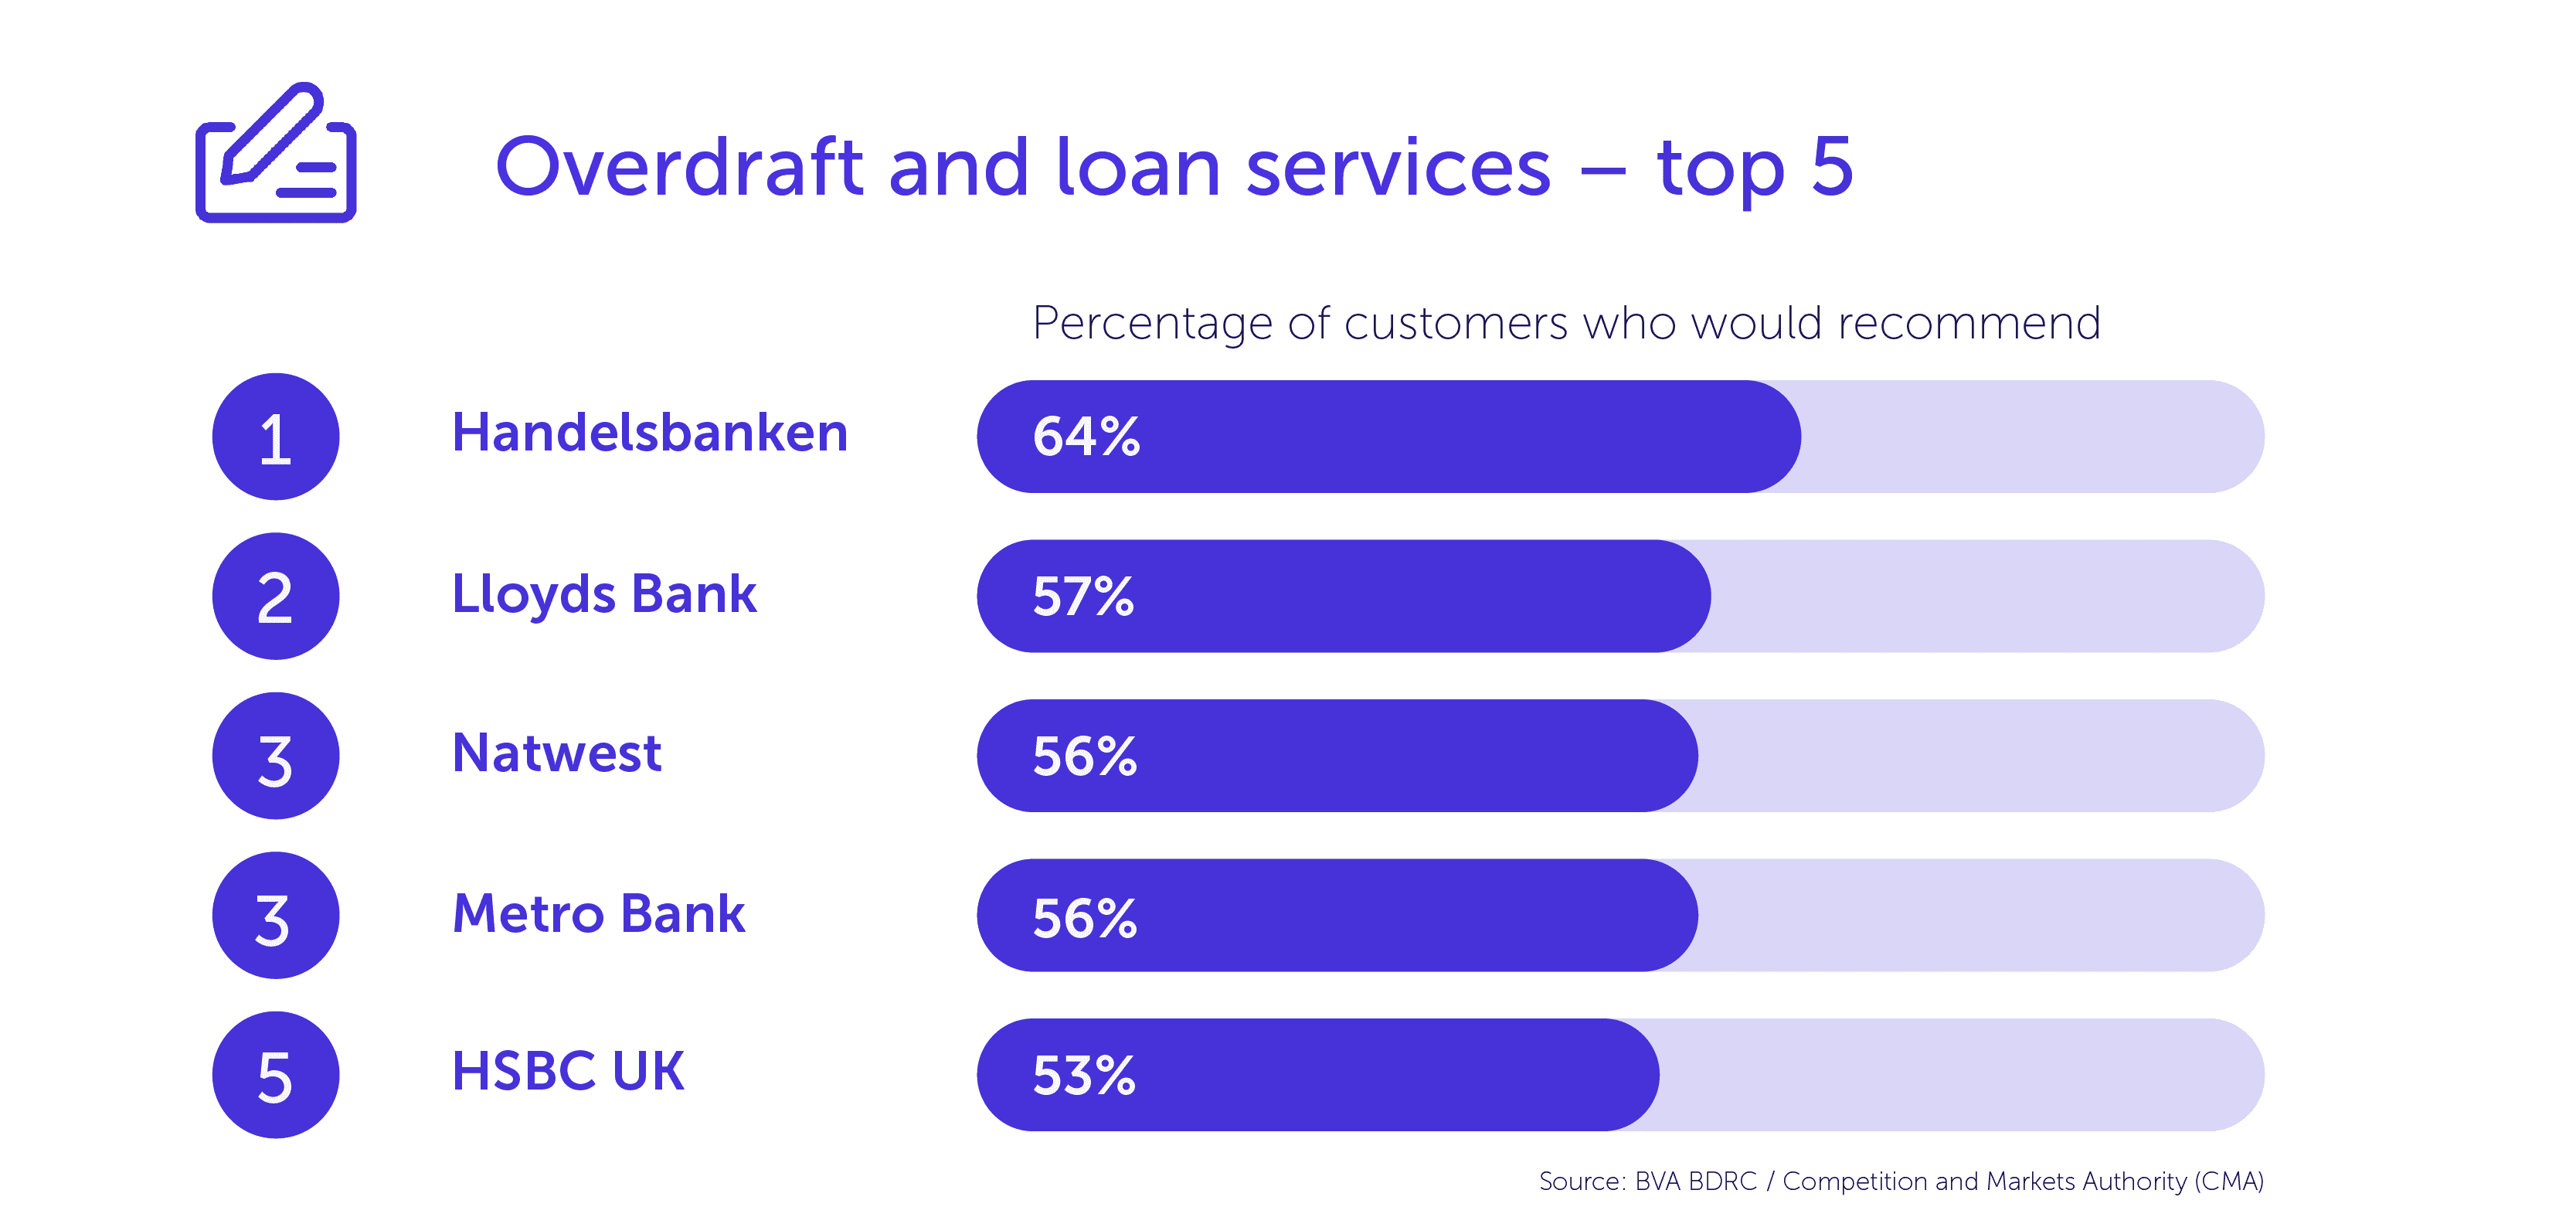 Top 5 banks for overdraft loan services